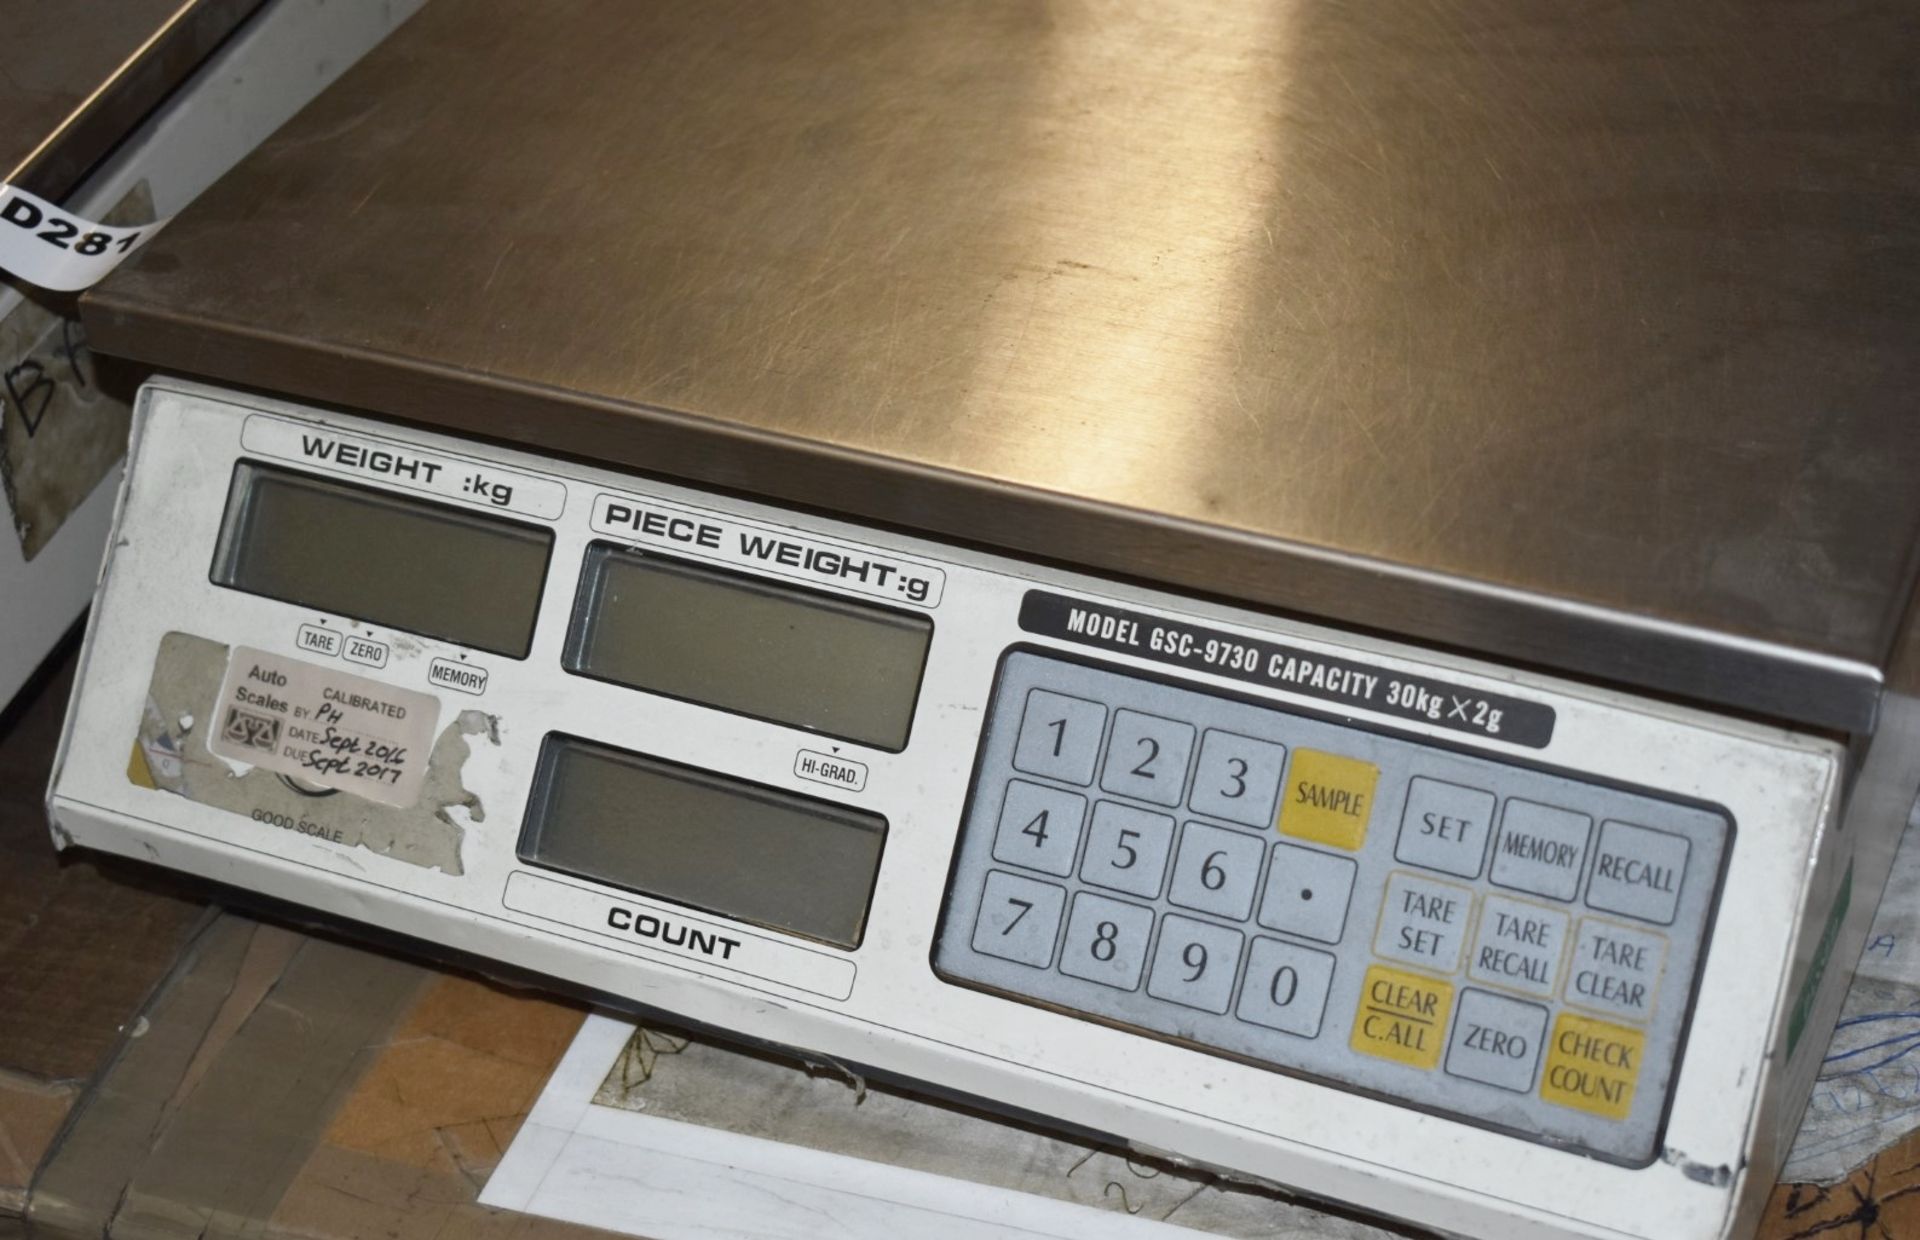 2 x Sets Of Electronic Weighing Scales With Stainless Steel Platforms - mODEL gsc-9730 - 30KG - Image 2 of 2